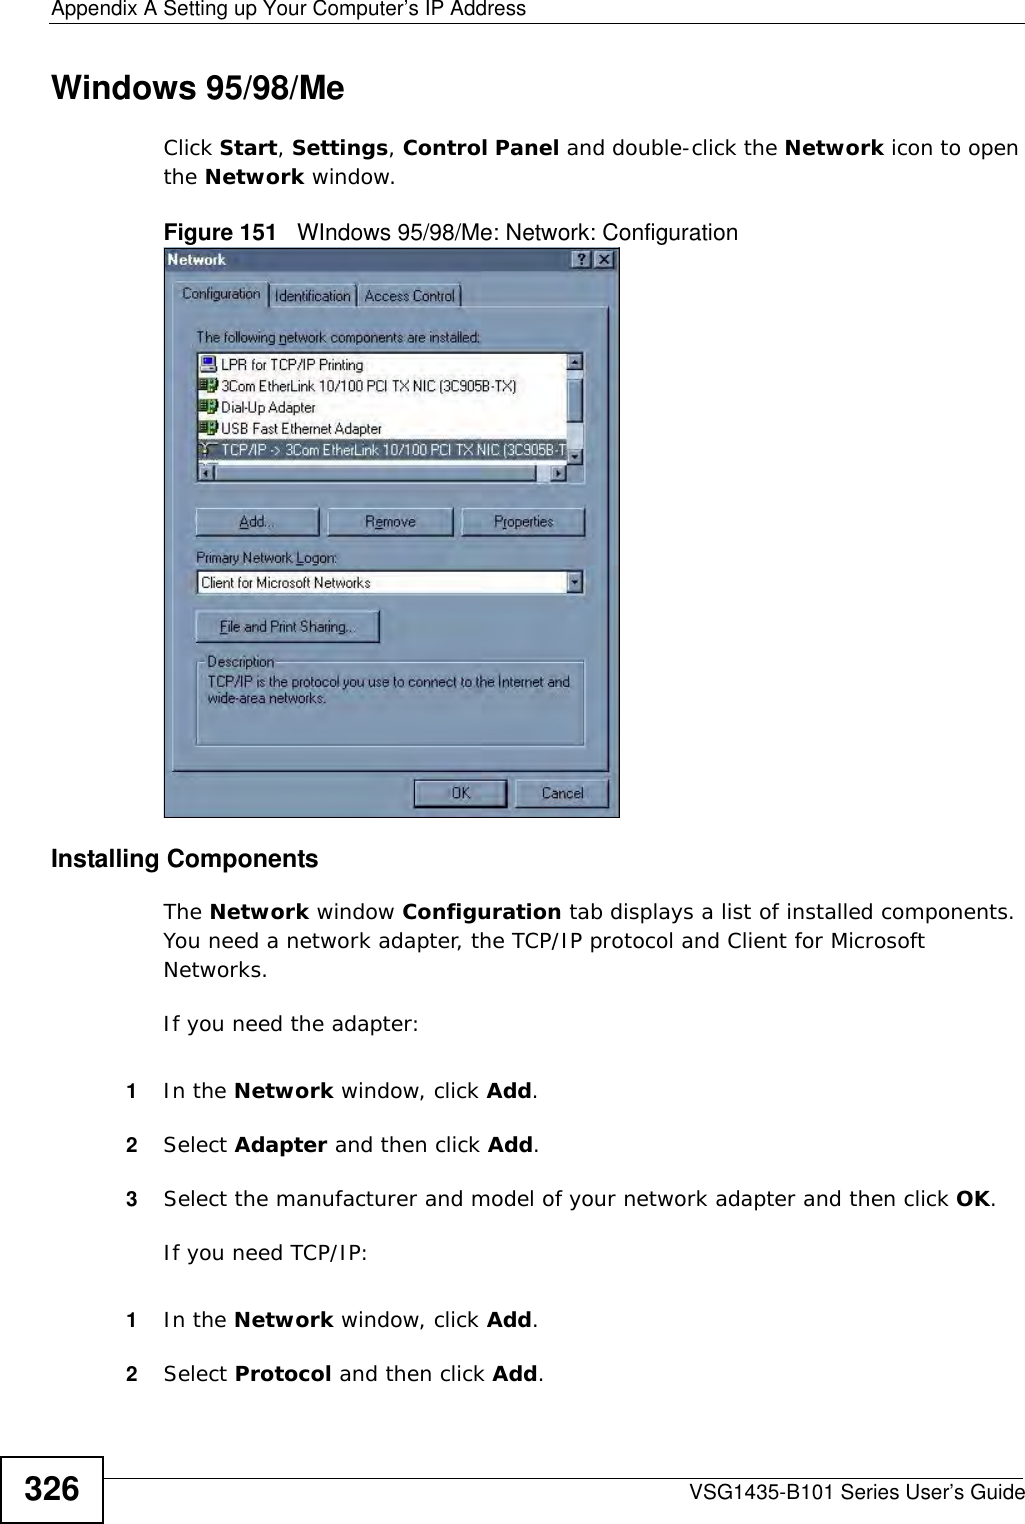 Appendix A Setting up Your Computer’s IP AddressVSG1435-B101 Series User’s Guide326Windows 95/98/MeClick Start, Settings, Control Panel and double-click the Network icon to open the Network window.Figure 151   WIndows 95/98/Me: Network: ConfigurationInstalling ComponentsThe Network window Configuration tab displays a list of installed components. You need a network adapter, the TCP/IP protocol and Client for Microsoft Networks.If you need the adapter:1In the Network window, click Add.2Select Adapter and then click Add.3Select the manufacturer and model of your network adapter and then click OK.If you need TCP/IP:1In the Network window, click Add.2Select Protocol and then click Add.